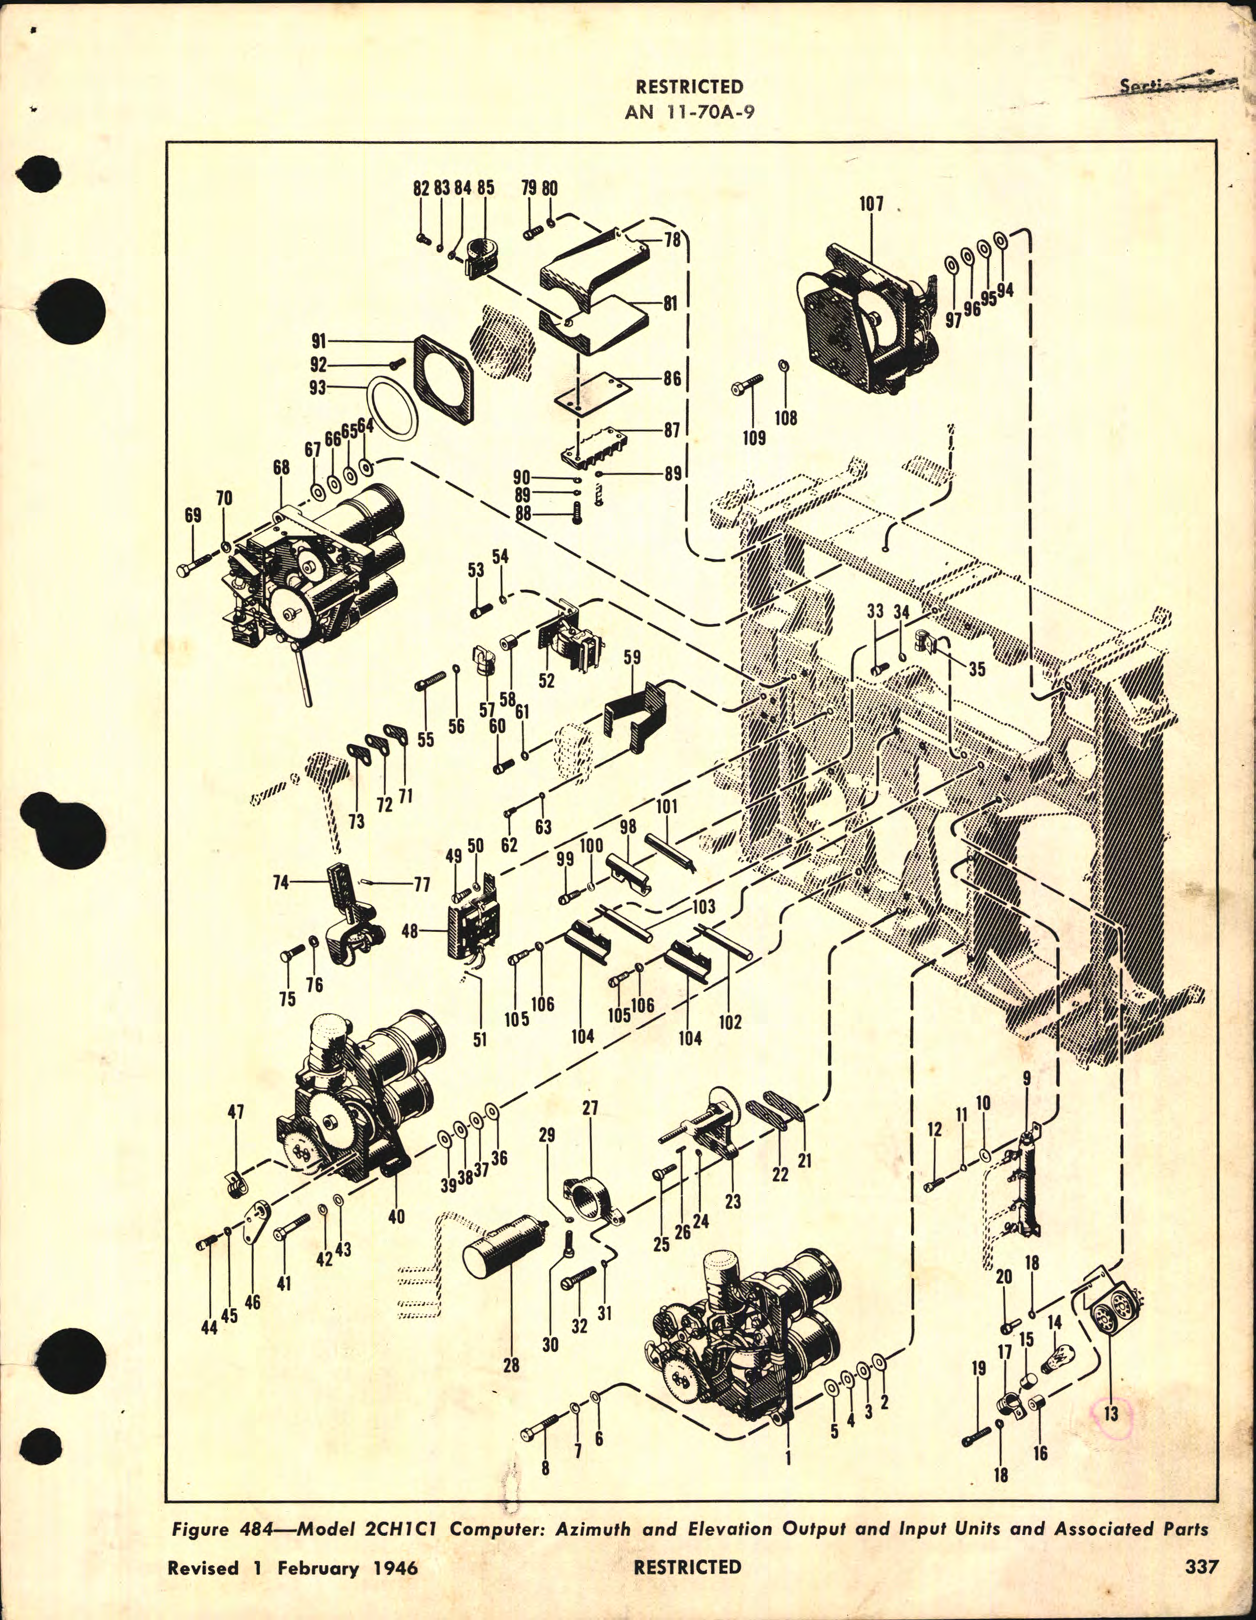 Sample page 7 from AirCorps Library document: Operation, Service, & Overhaul Instructions with Parts Catalog for Type CH Computer Models